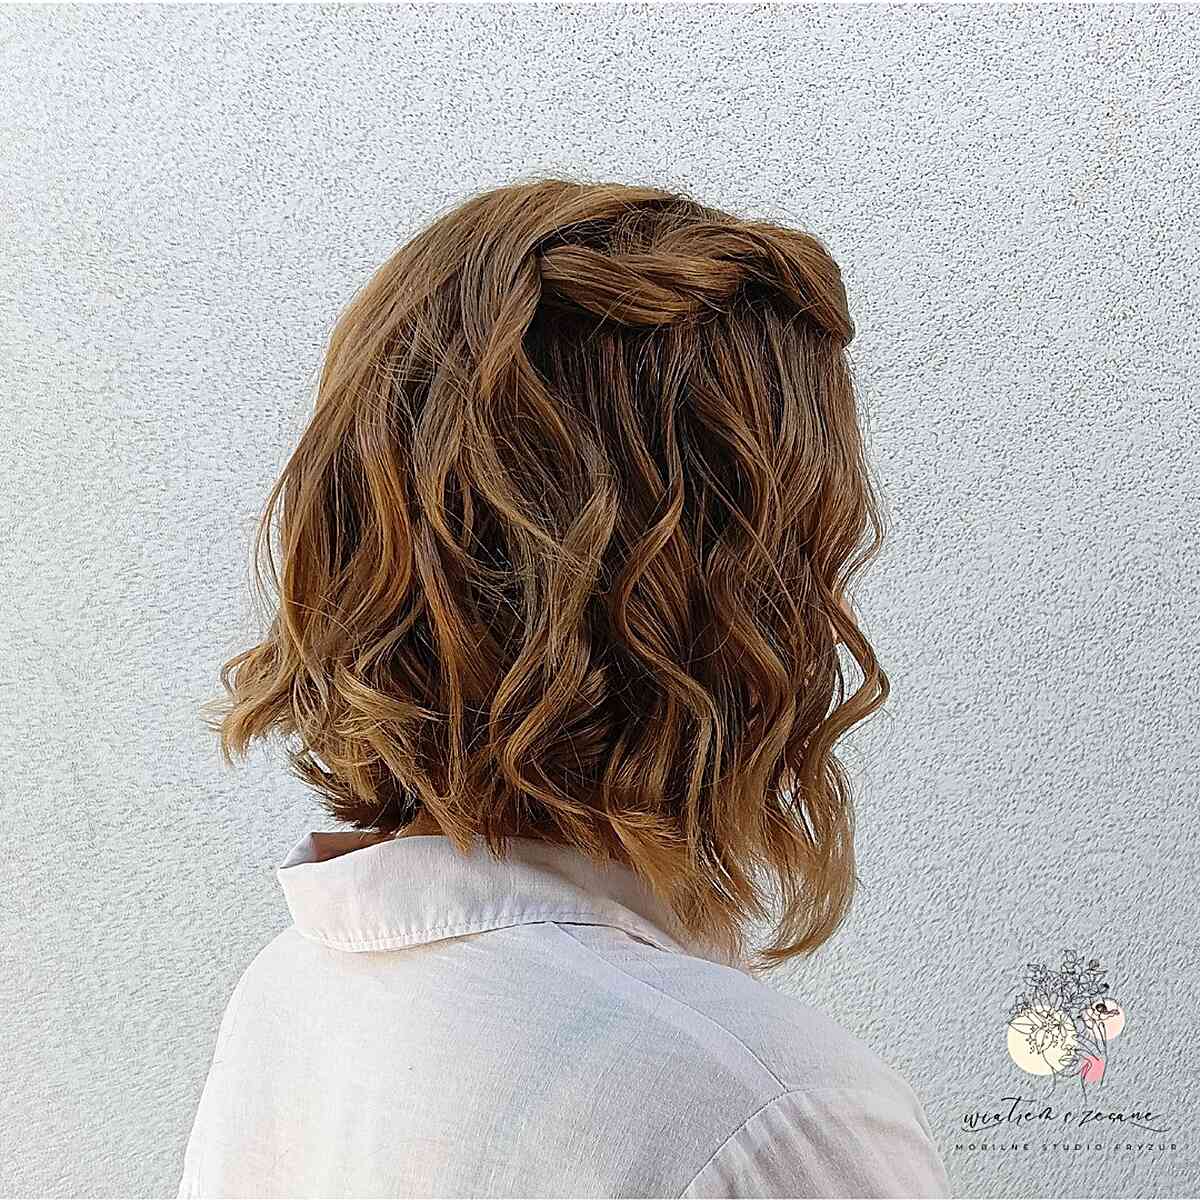 Soft Tousled Waves with a Side Twist for a Lob Cut with Golden Brown Color